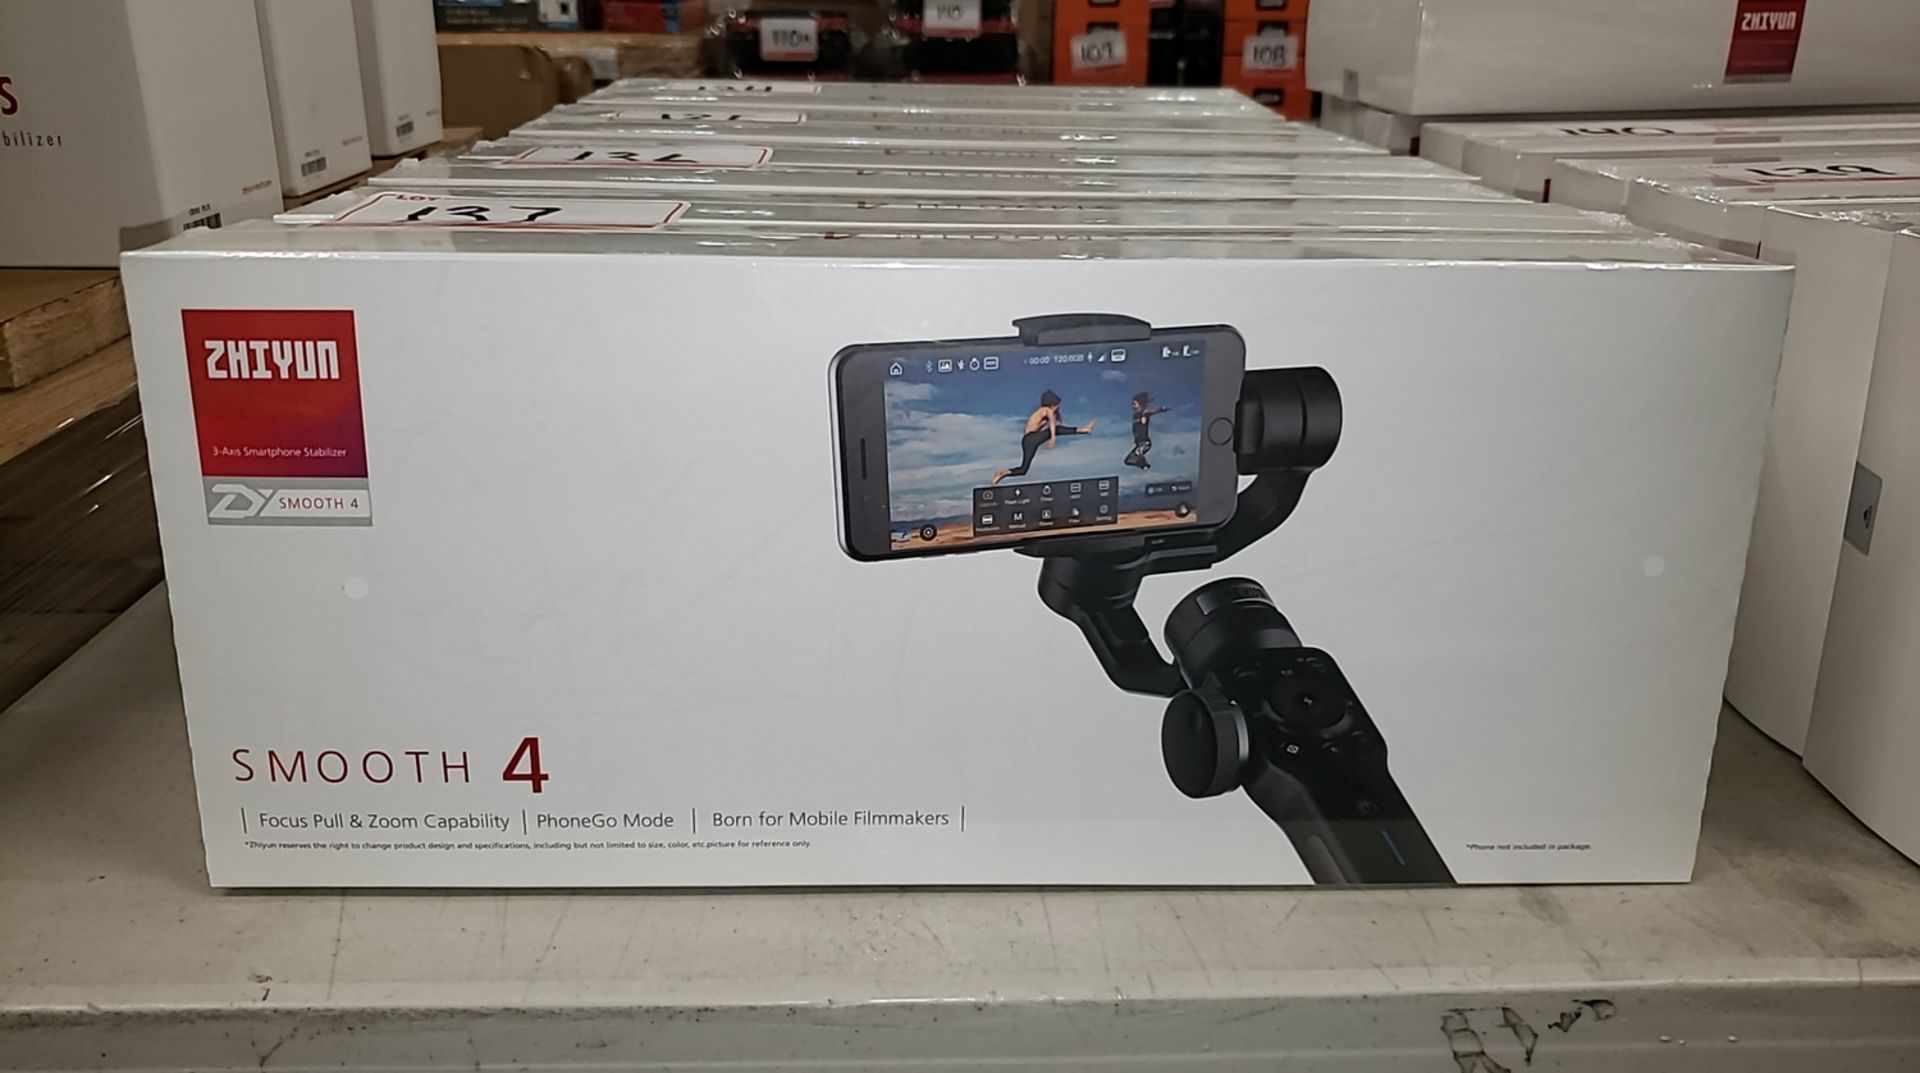 UNITS - ZHIYUN SMOOTH 4 3-AXIS SMARTPHONE STABILIZER (NEW IN BOX)